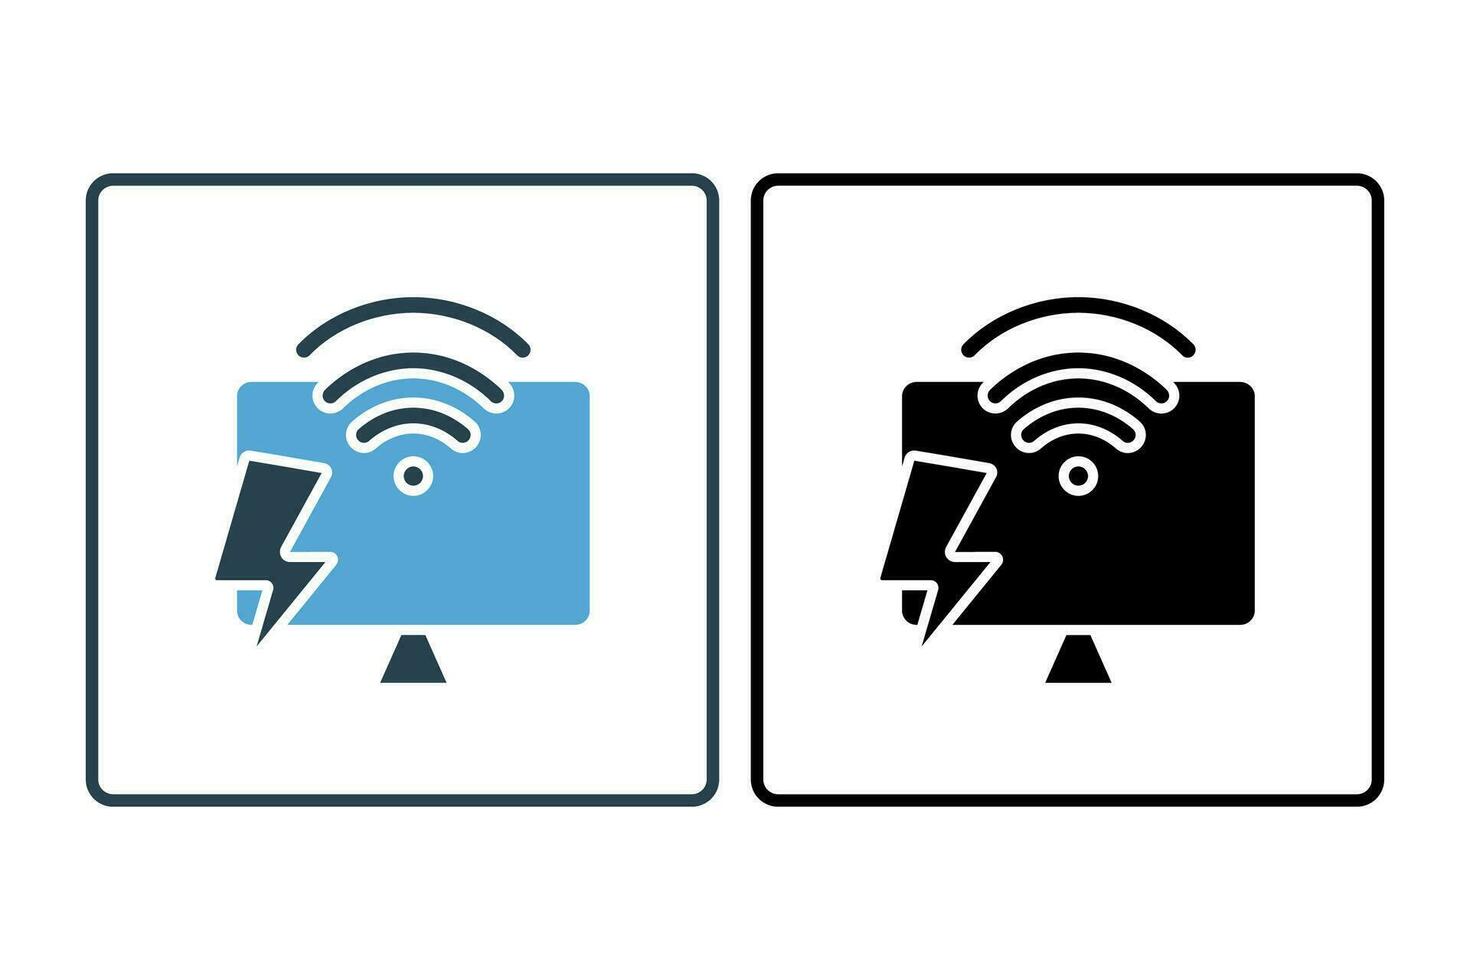 Fast internet icon. computer with wifi and lightning. icon related to speed, network. suitable for web site, app, user interfaces, printable etc. Solid icon style. Simple vector design editable